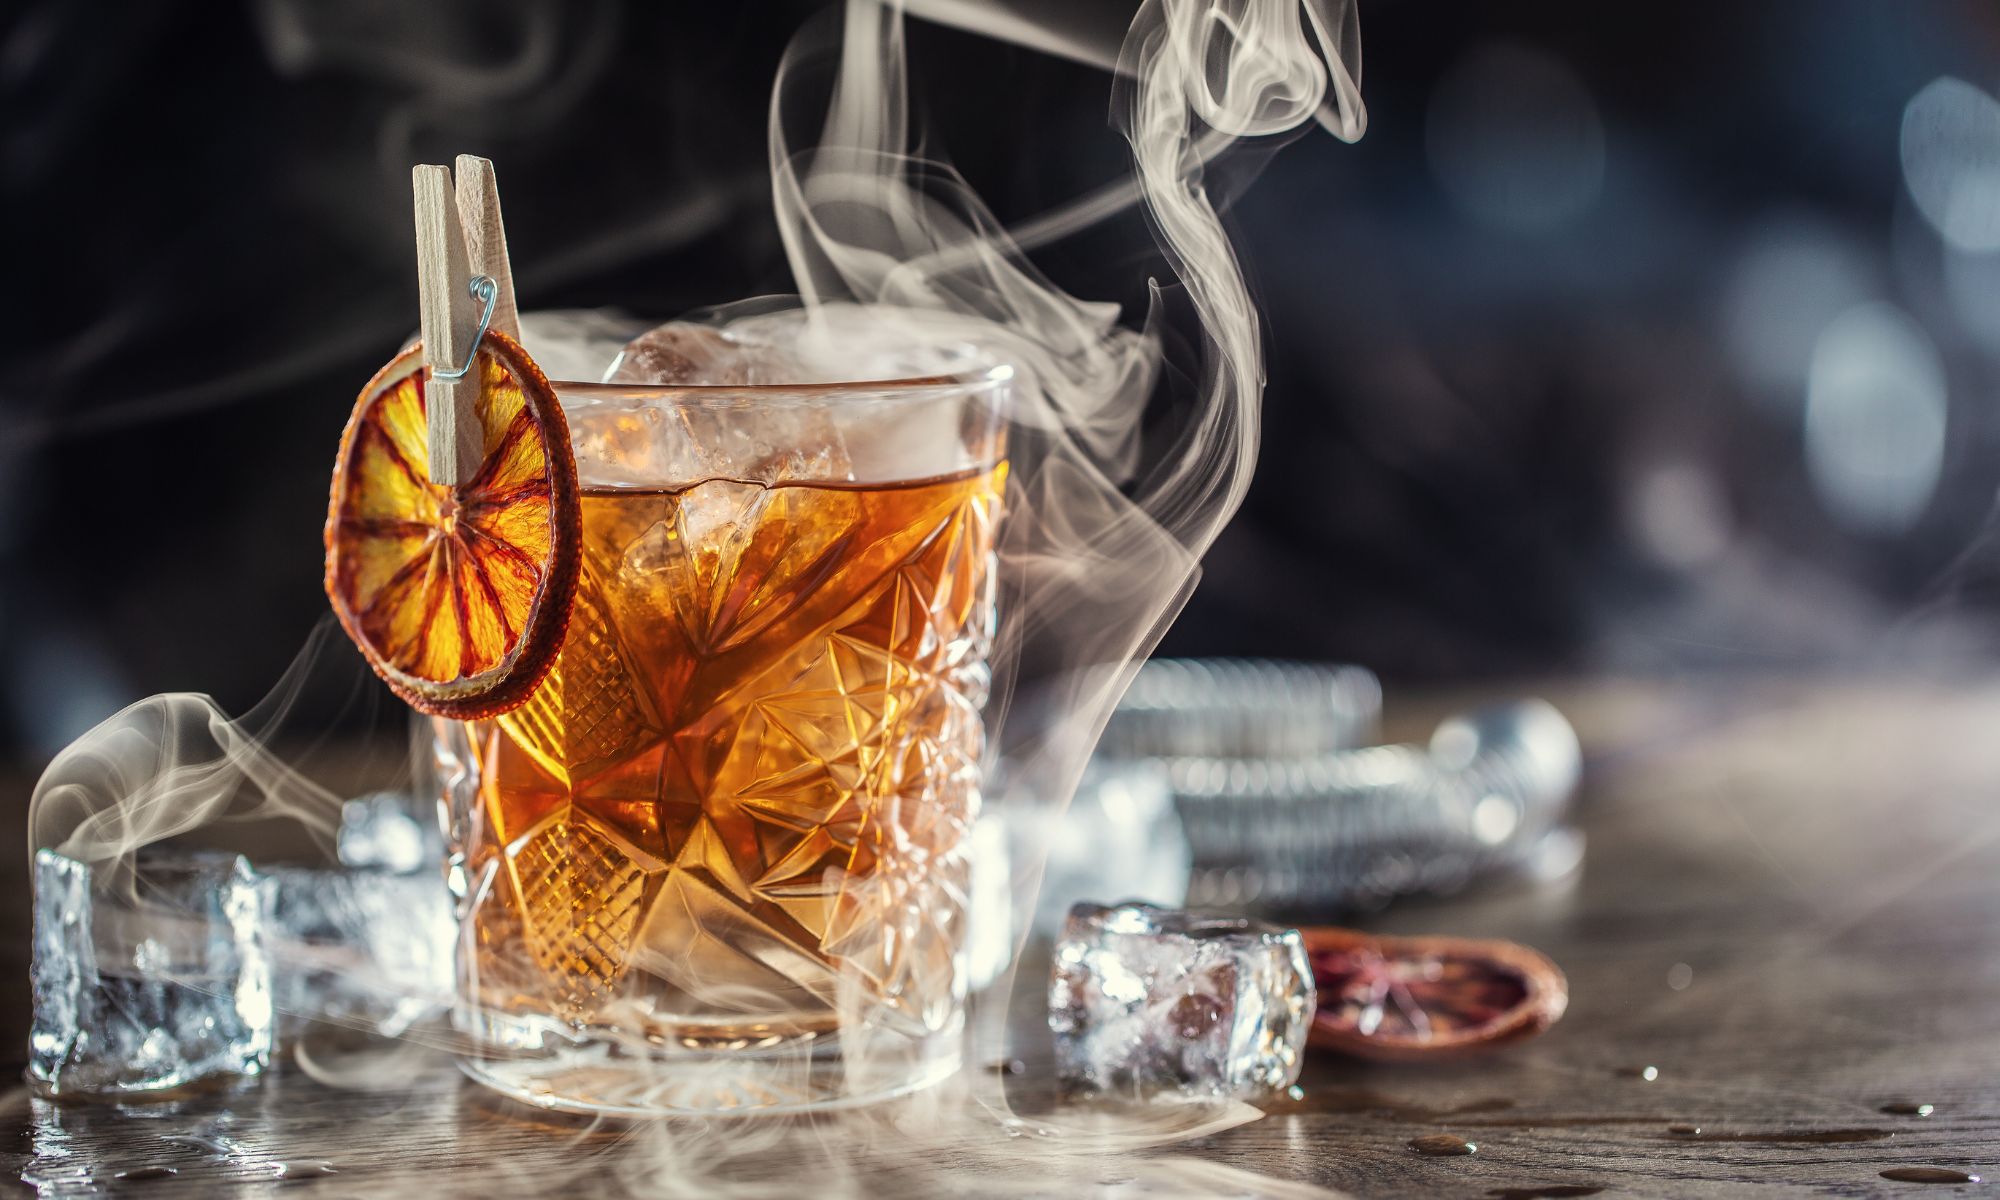 old fashioned cocktail being smoked